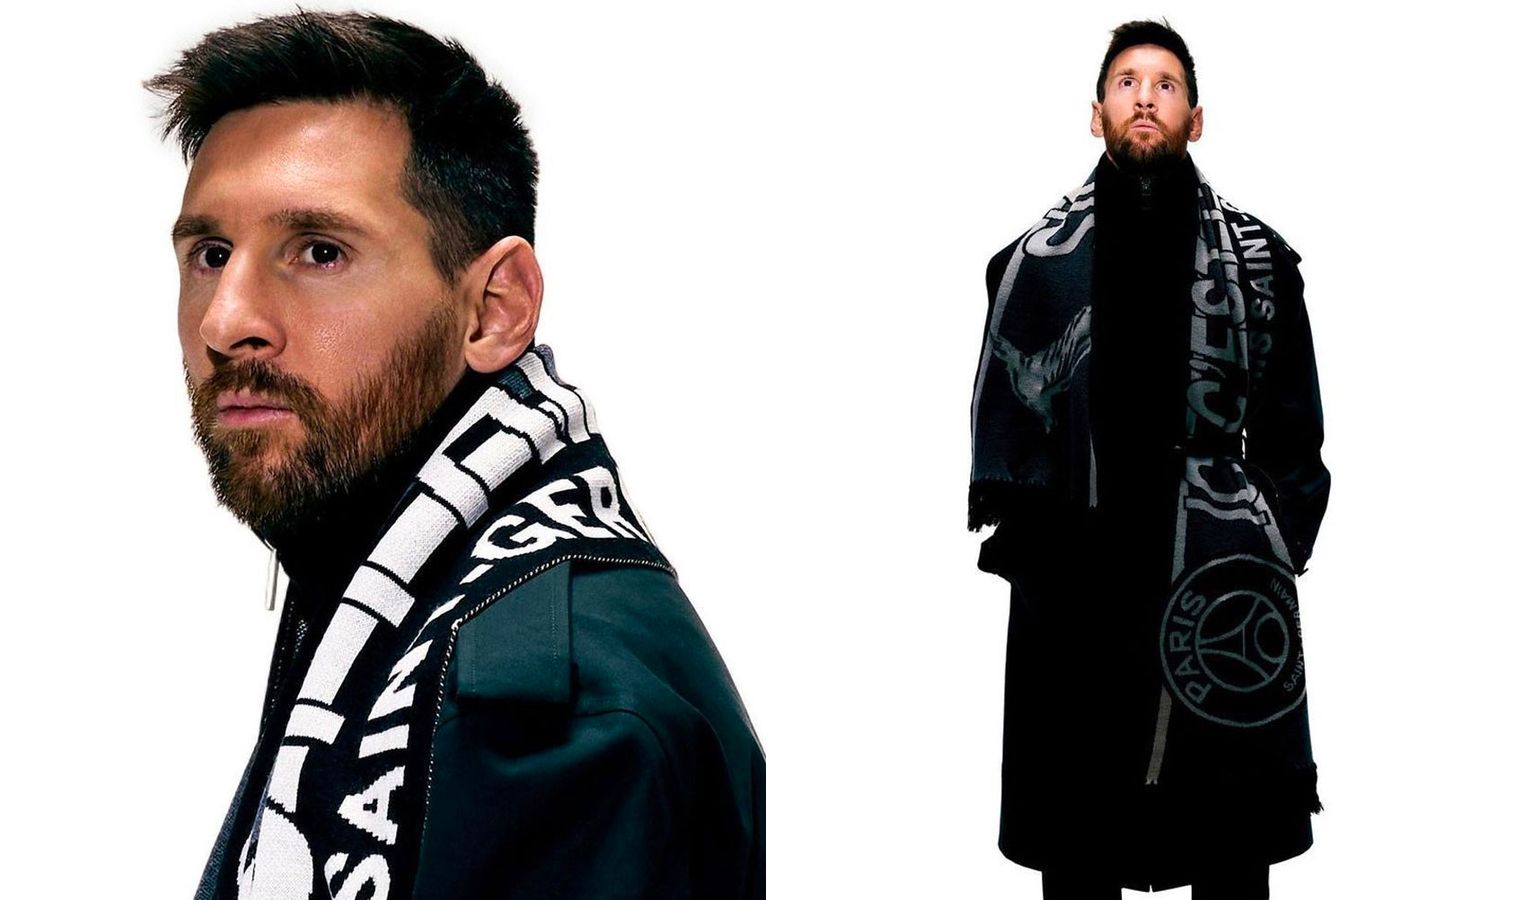 Paris Saint-Germain x GOAT People of Paris collection image of Messi wearing a green overcoat and a black and white PSG scarf.